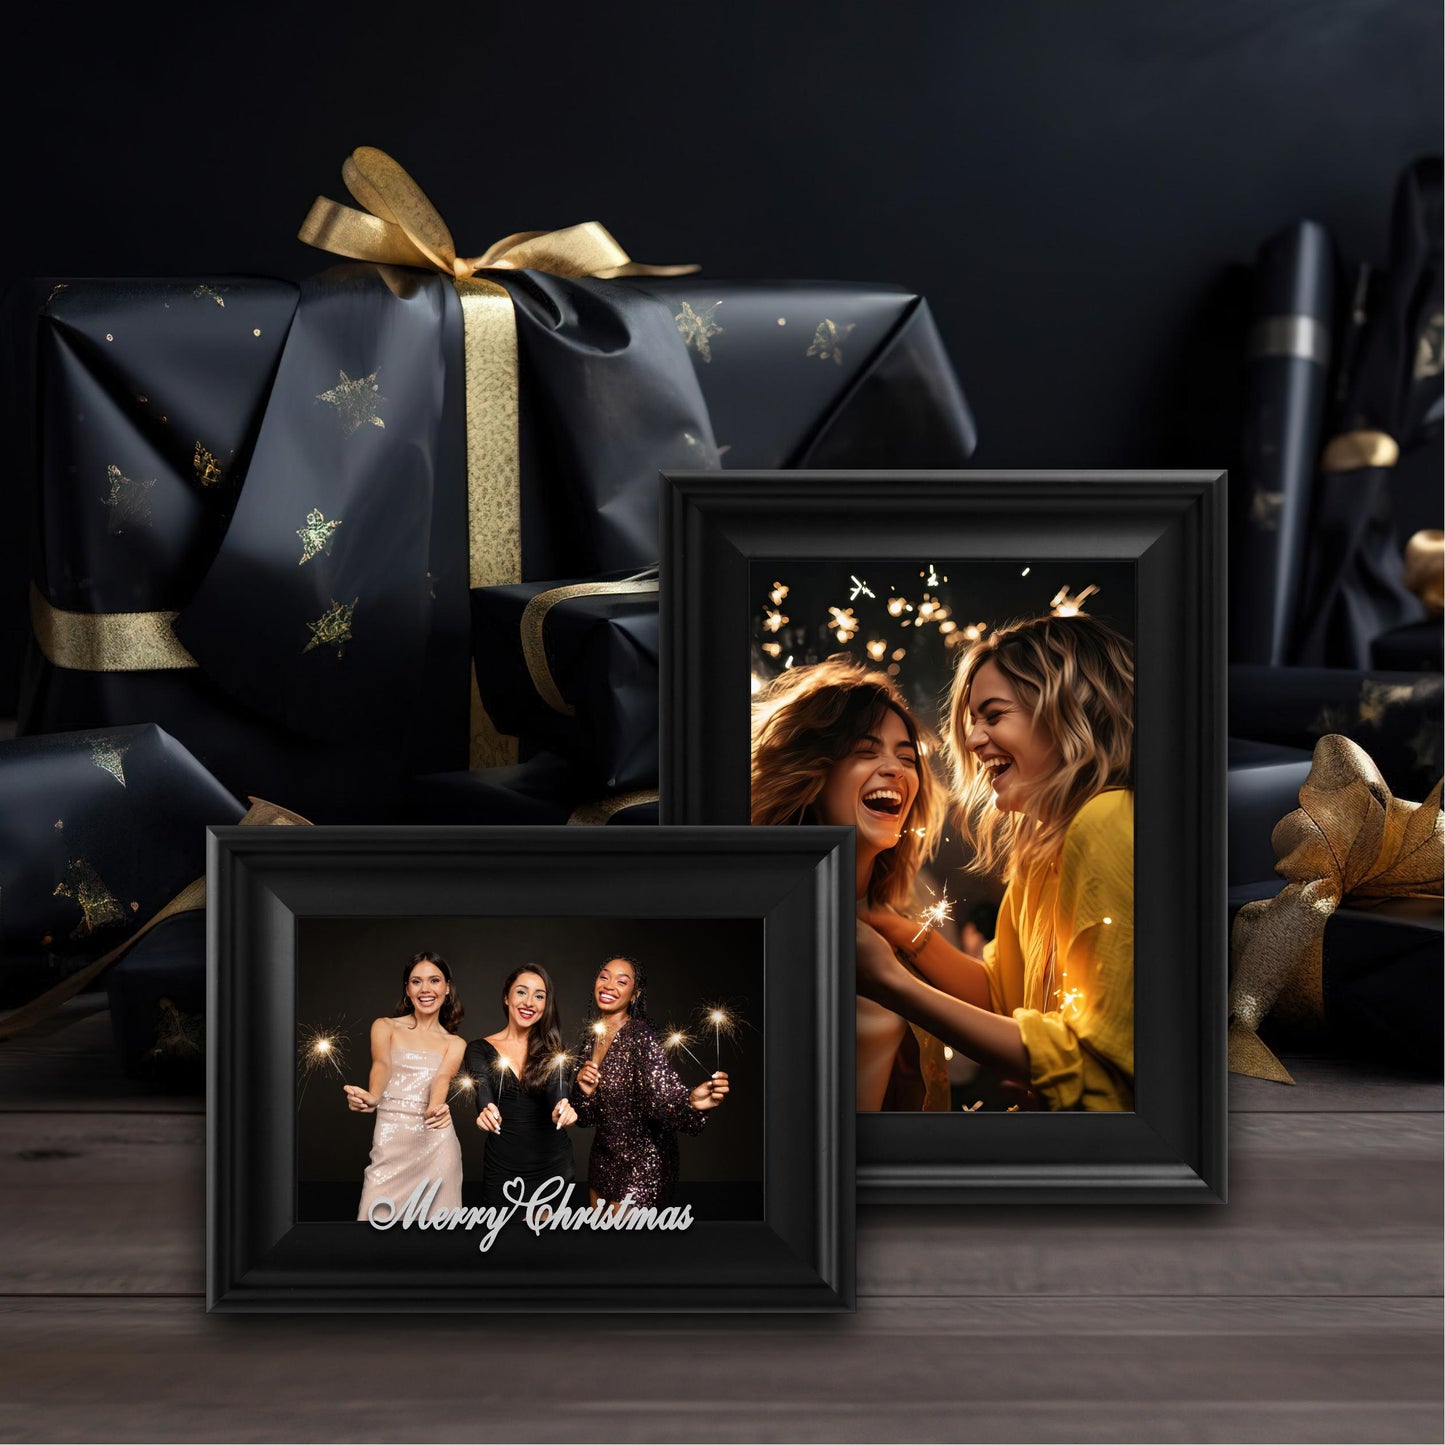 Christmas Picture Frame Photo Frame Embellished Gift for Wall and Tabletop Display (5x7 and 4x6, Black)